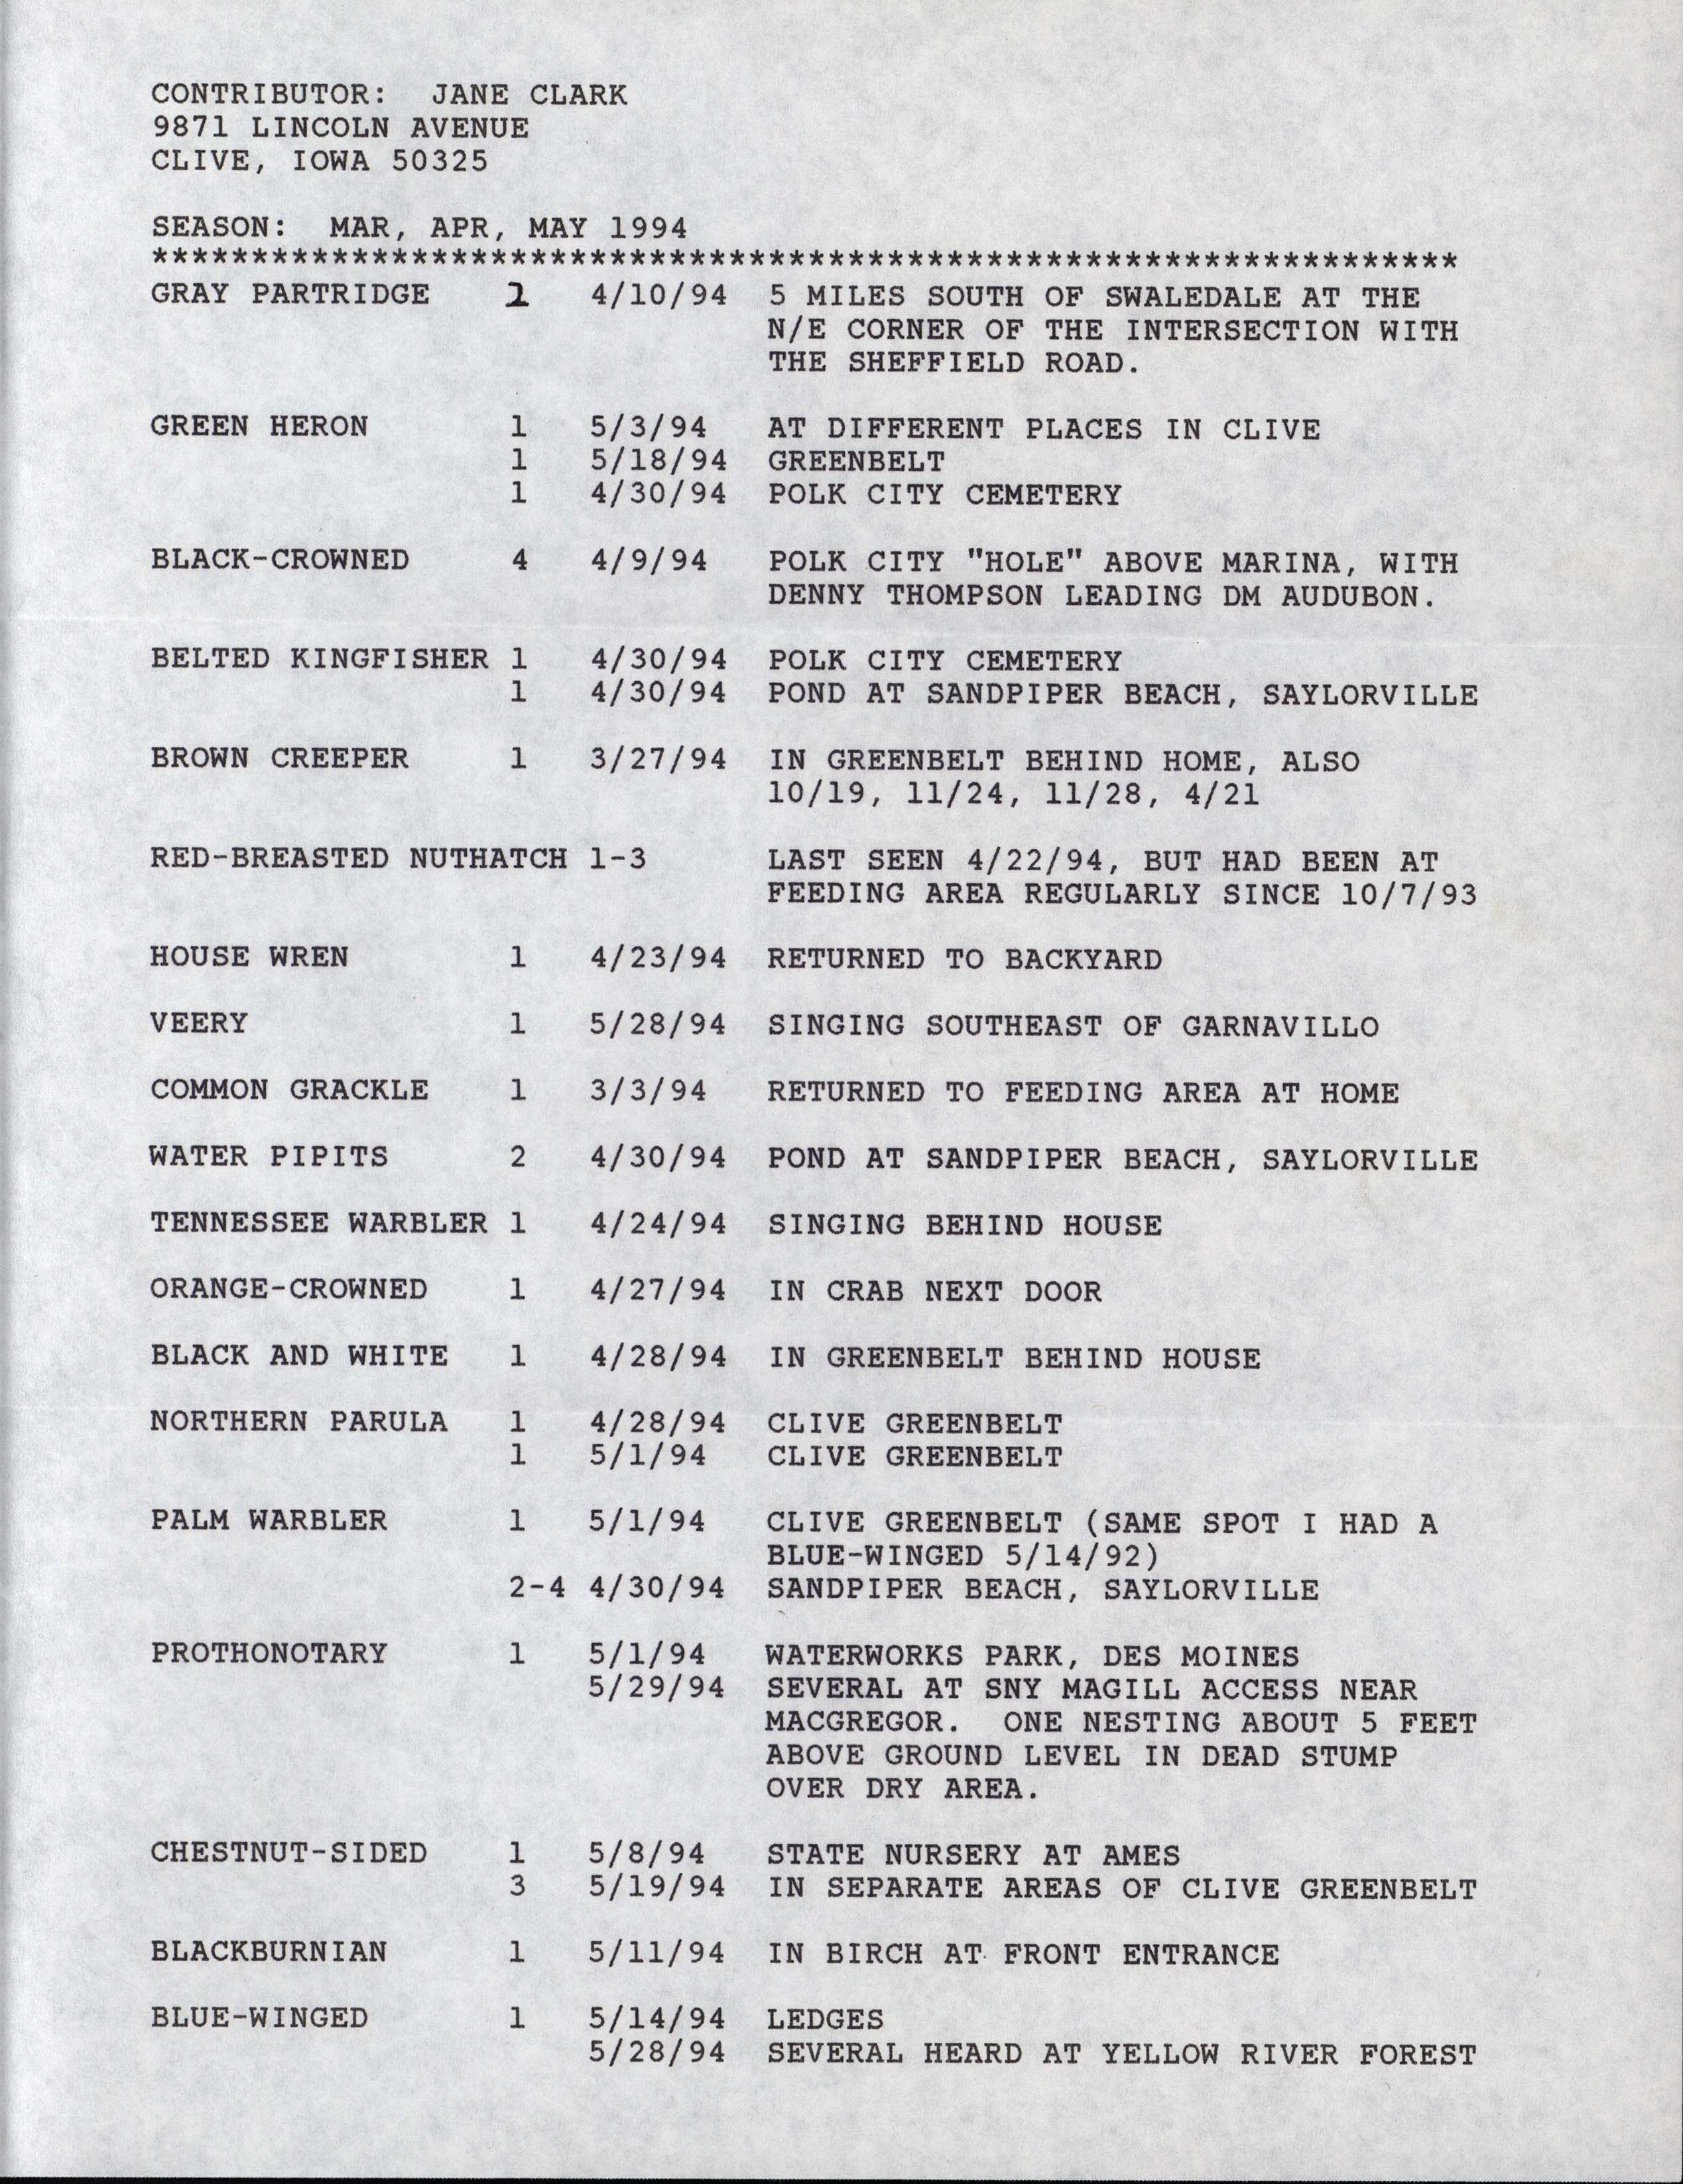 Annotated bird sighting list for Spring 1994 compiled by Jane Clark